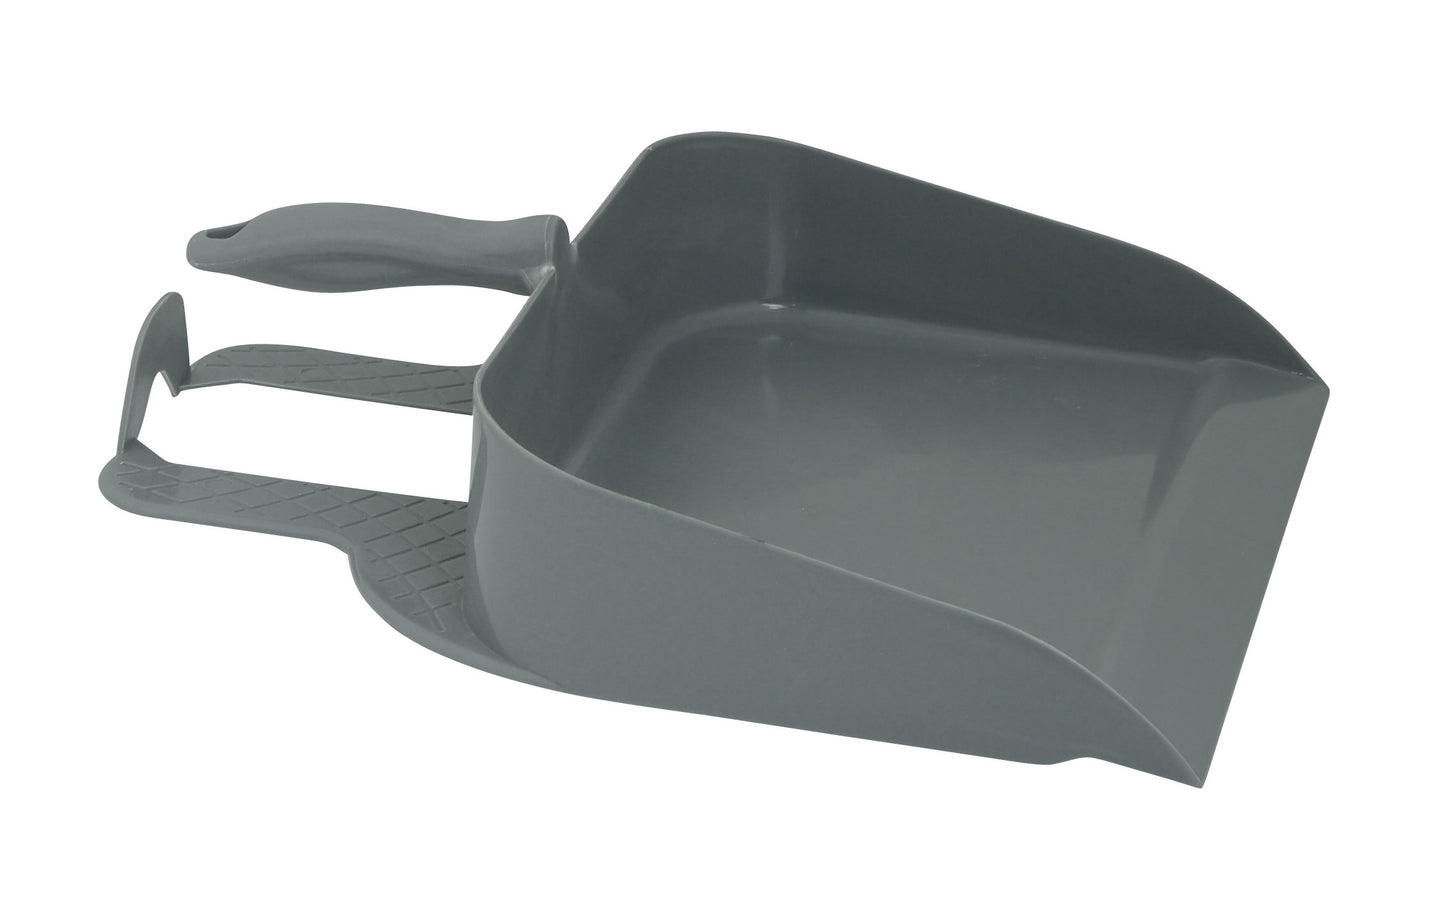 Step-On Dust Pan X-Large